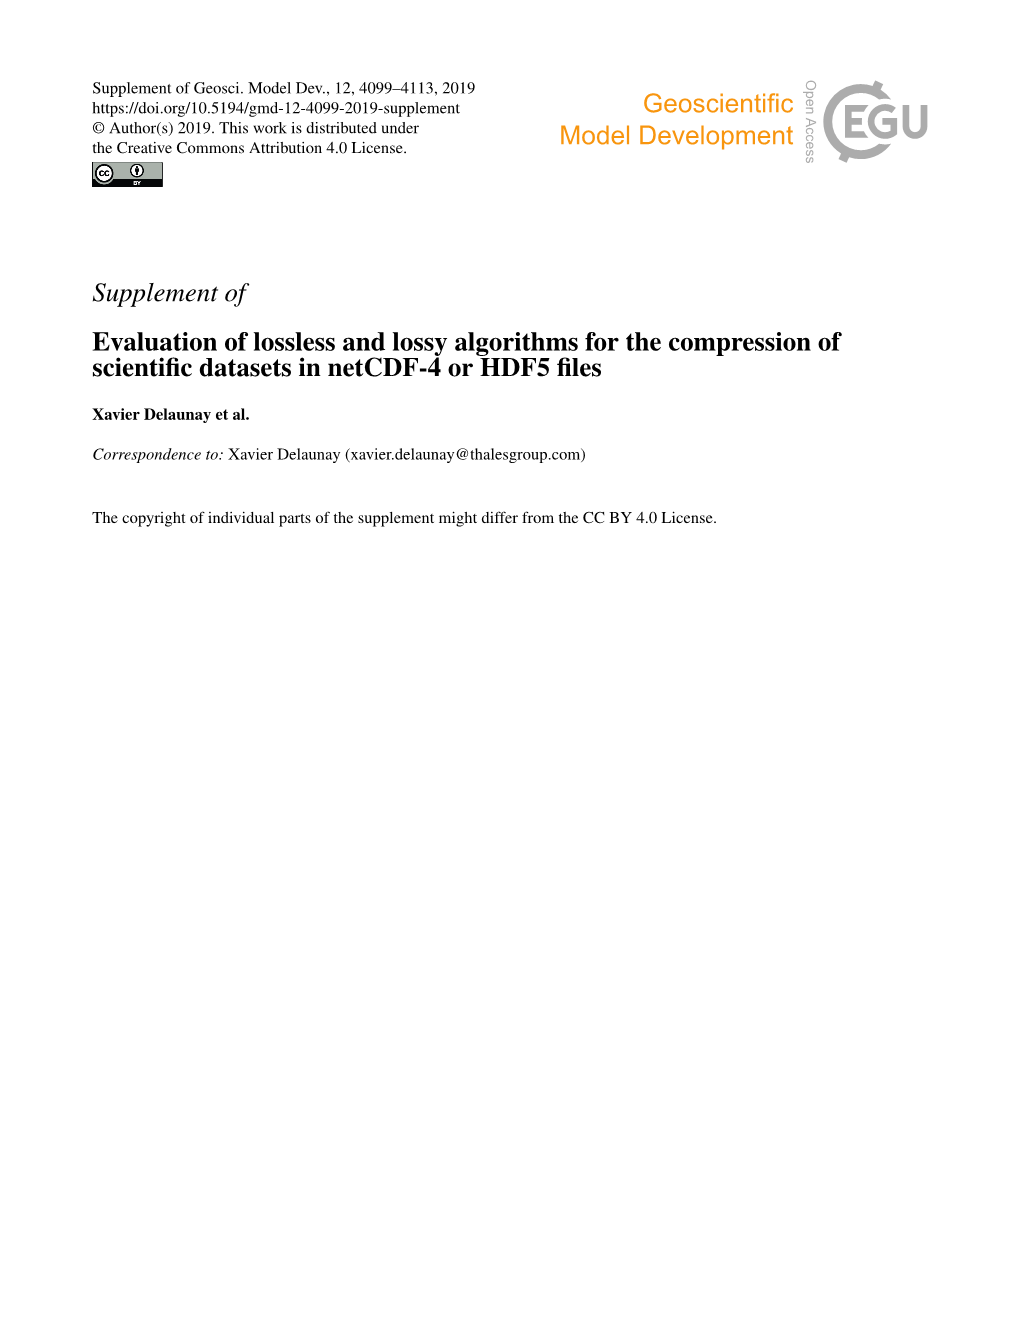 Supplement of Evaluation of Lossless and Lossy Algorithms for the Compression of Scientiﬁc Datasets in Netcdf-4 Or HDF5 ﬁles